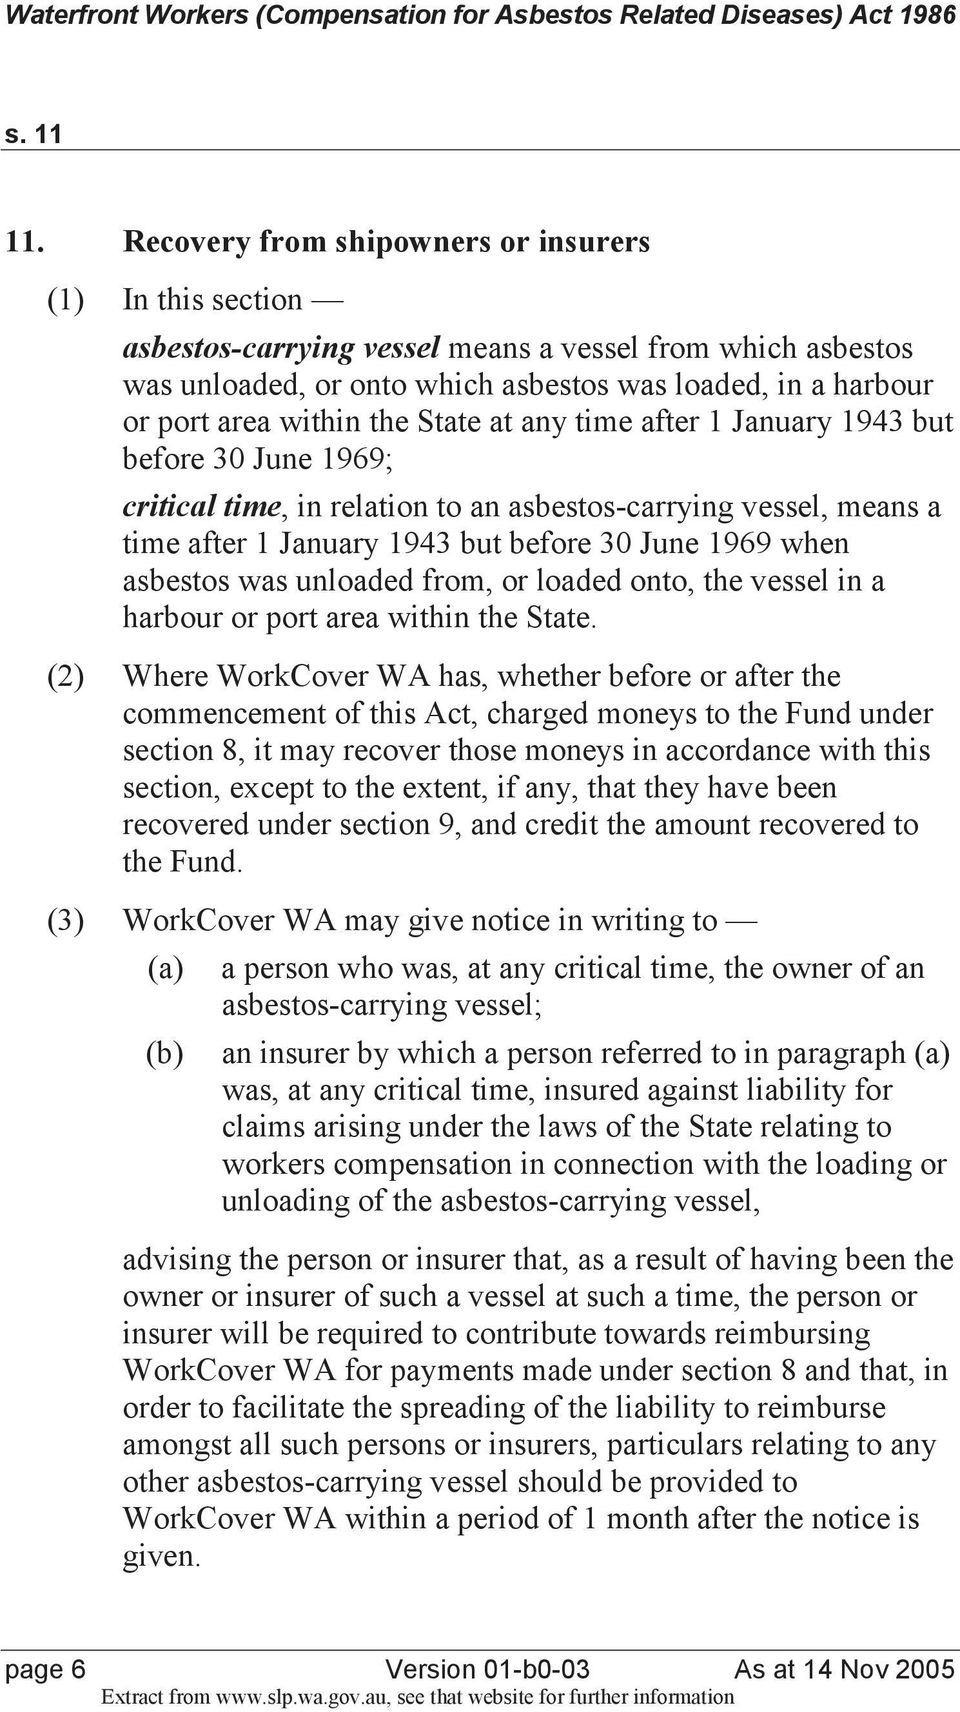 the State at any time after 1 January 1943 but before 30 June 1969; critical time, in relation to an asbestos-carrying vessel, means a time after 1 January 1943 but before 30 June 1969 when asbestos